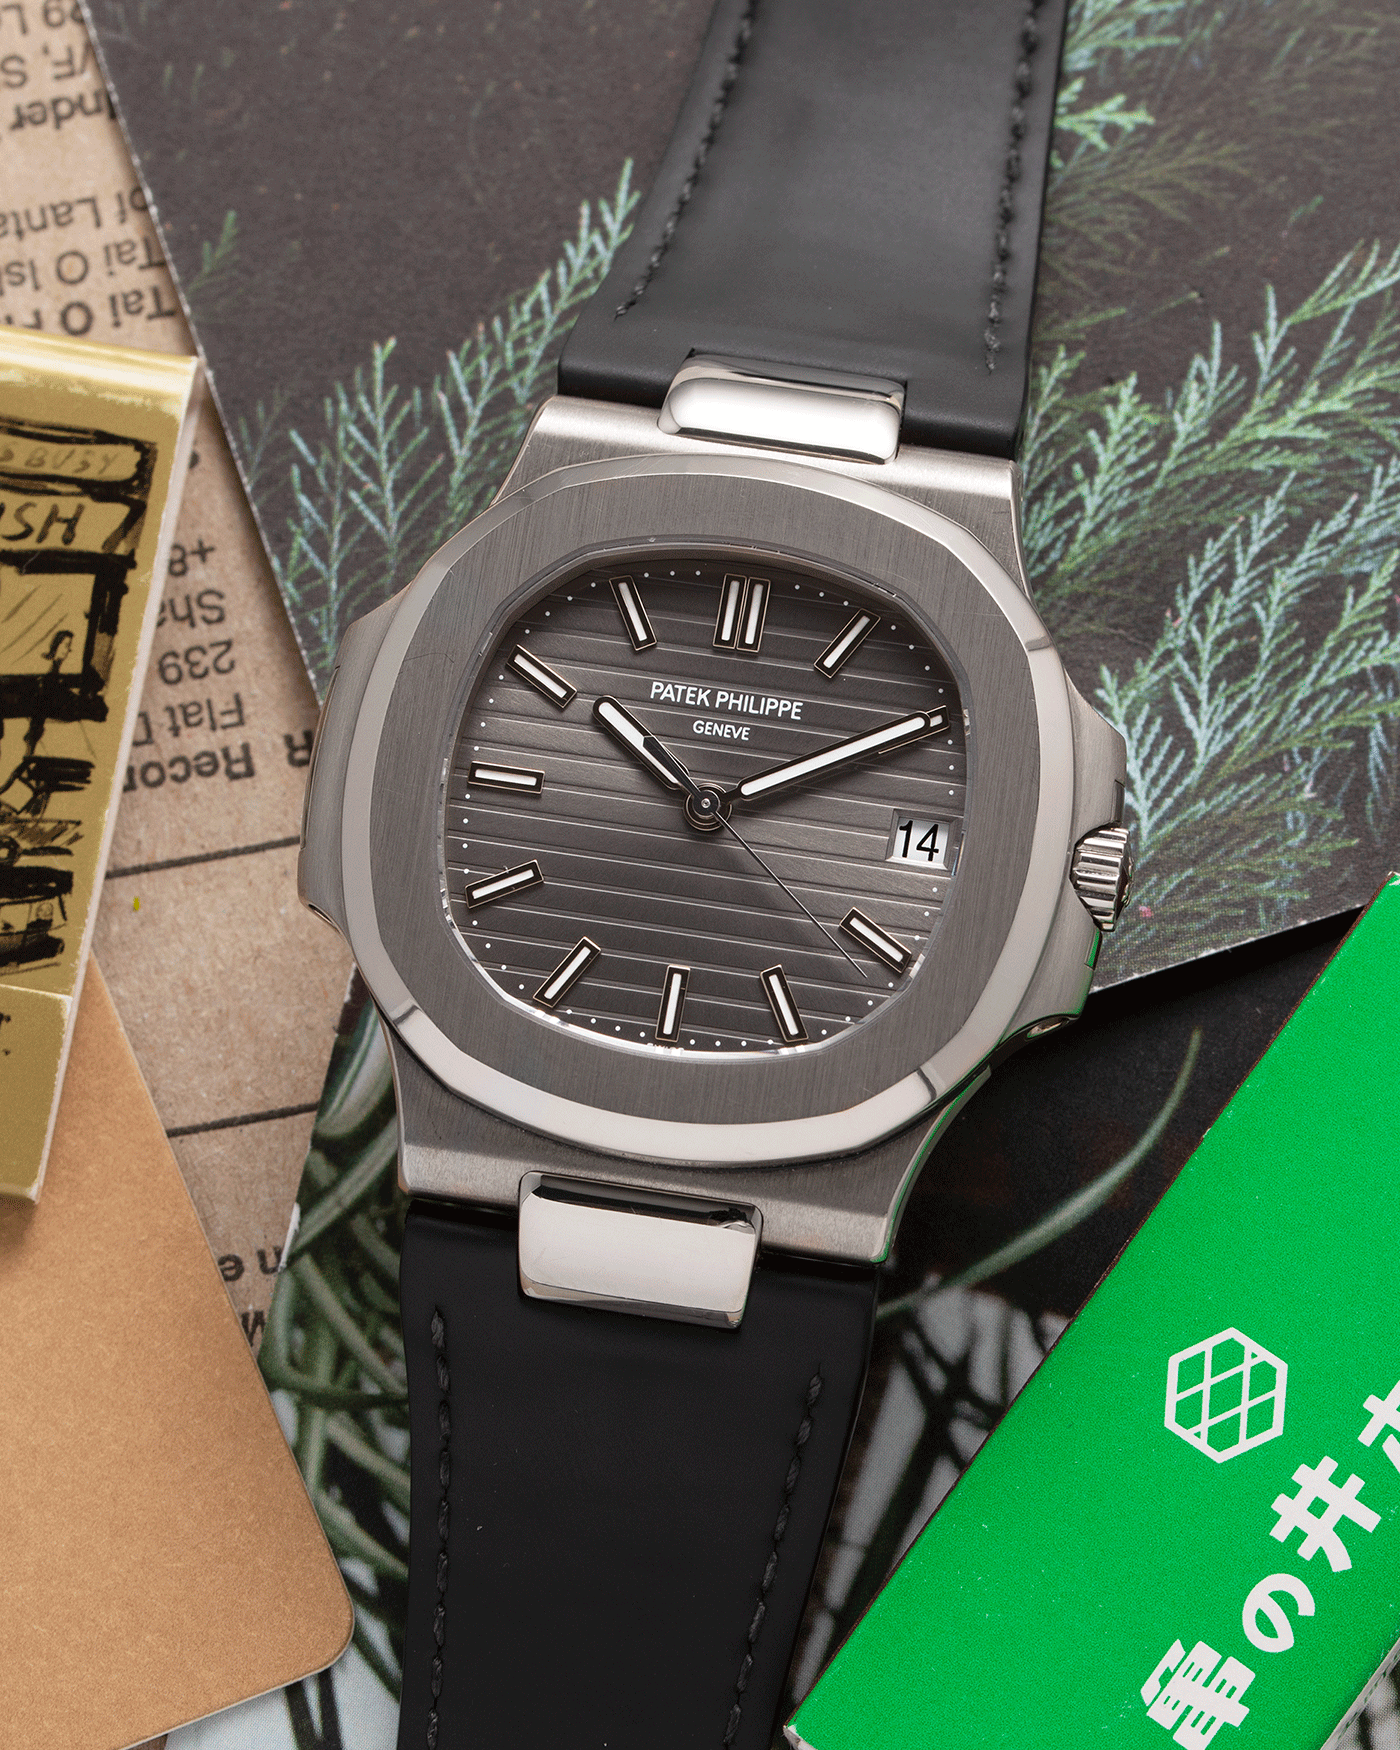 Brand: Patek Philippe Year: 2008 Model: Nautilus Reference Number: 5711G Material:18k White Gold Movement: Calibre 324SC Case Diameter: 40mm Bracelet: Patek Philippe Grey Leather Strap with 18k White Gold Nautilus DeployantBrand: Patek Philippe Year: 2008 Model: Nautilus Reference Number: 5711G Material:18k White Gold Movement: Calibre 324SC Case Diameter: 40mm Bracelet: Patek Philippe Grey Leather Strap with 18k White Gold Nautilus Deployant